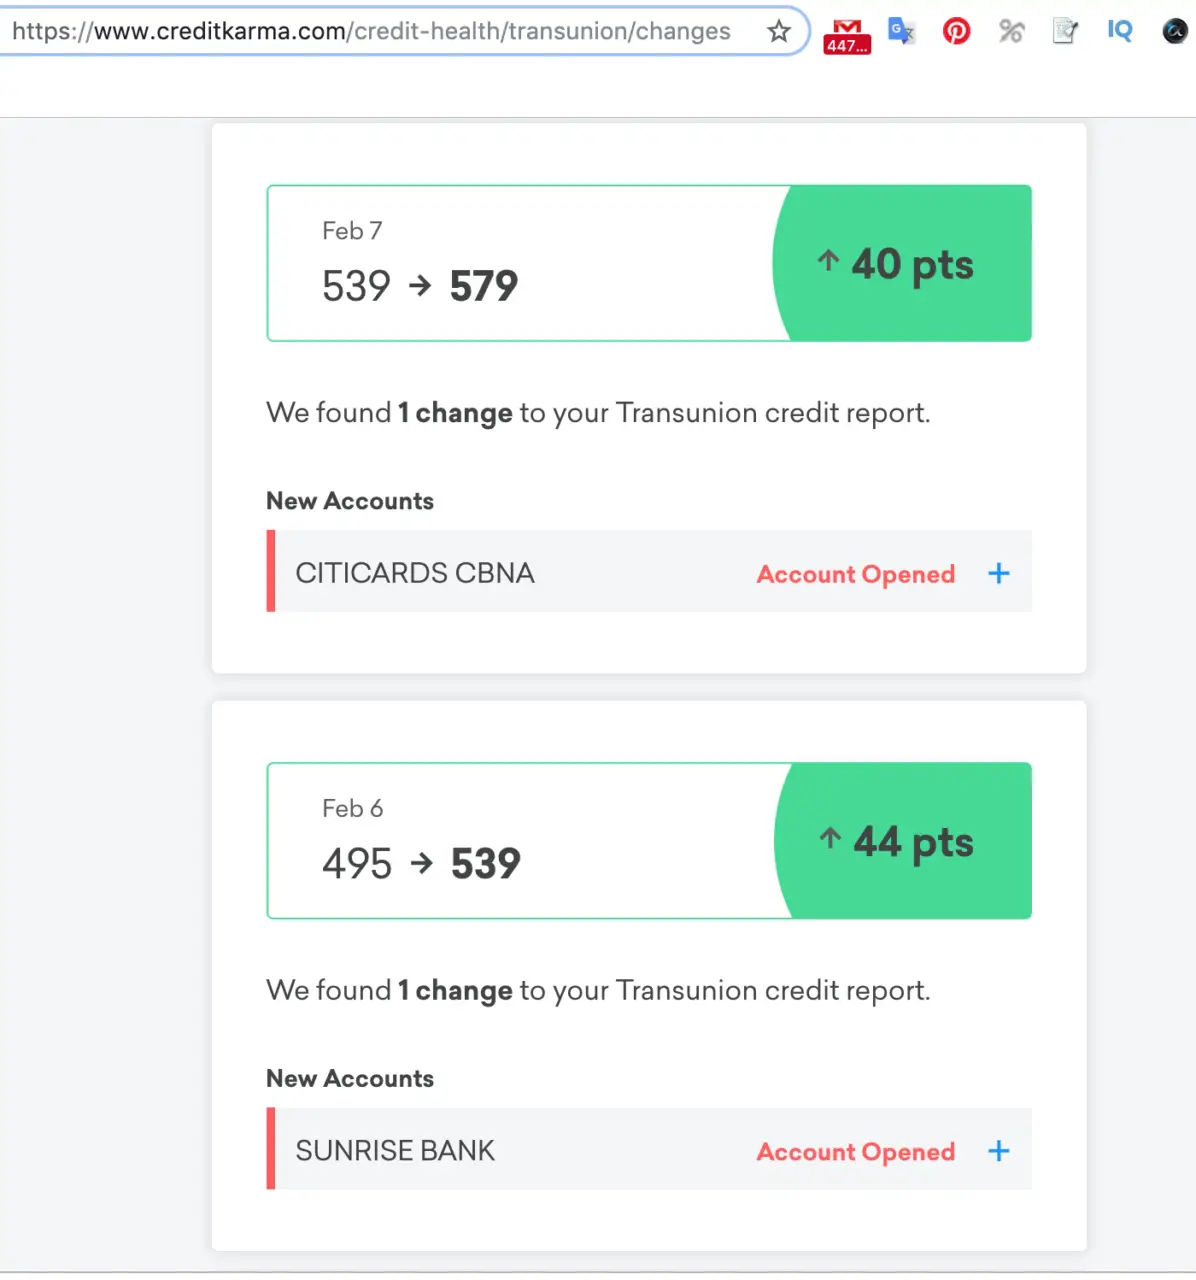 This Guy Increased His Credit Score By 84 Points In One Month! Here